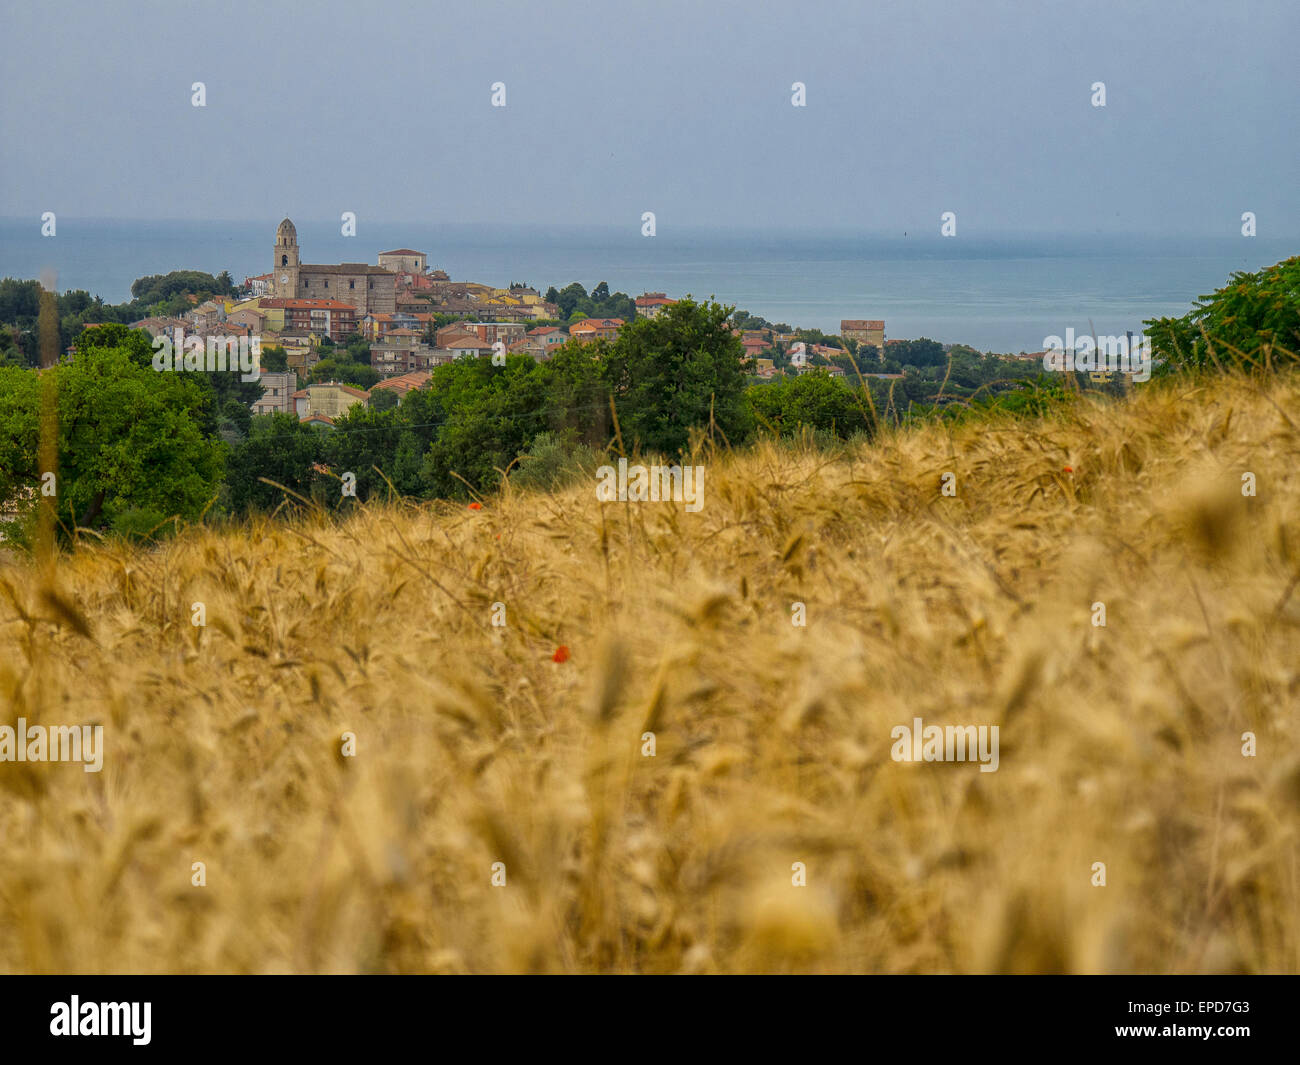 The old town of Sirolo, Conero, Marche, Italy Stock Photo